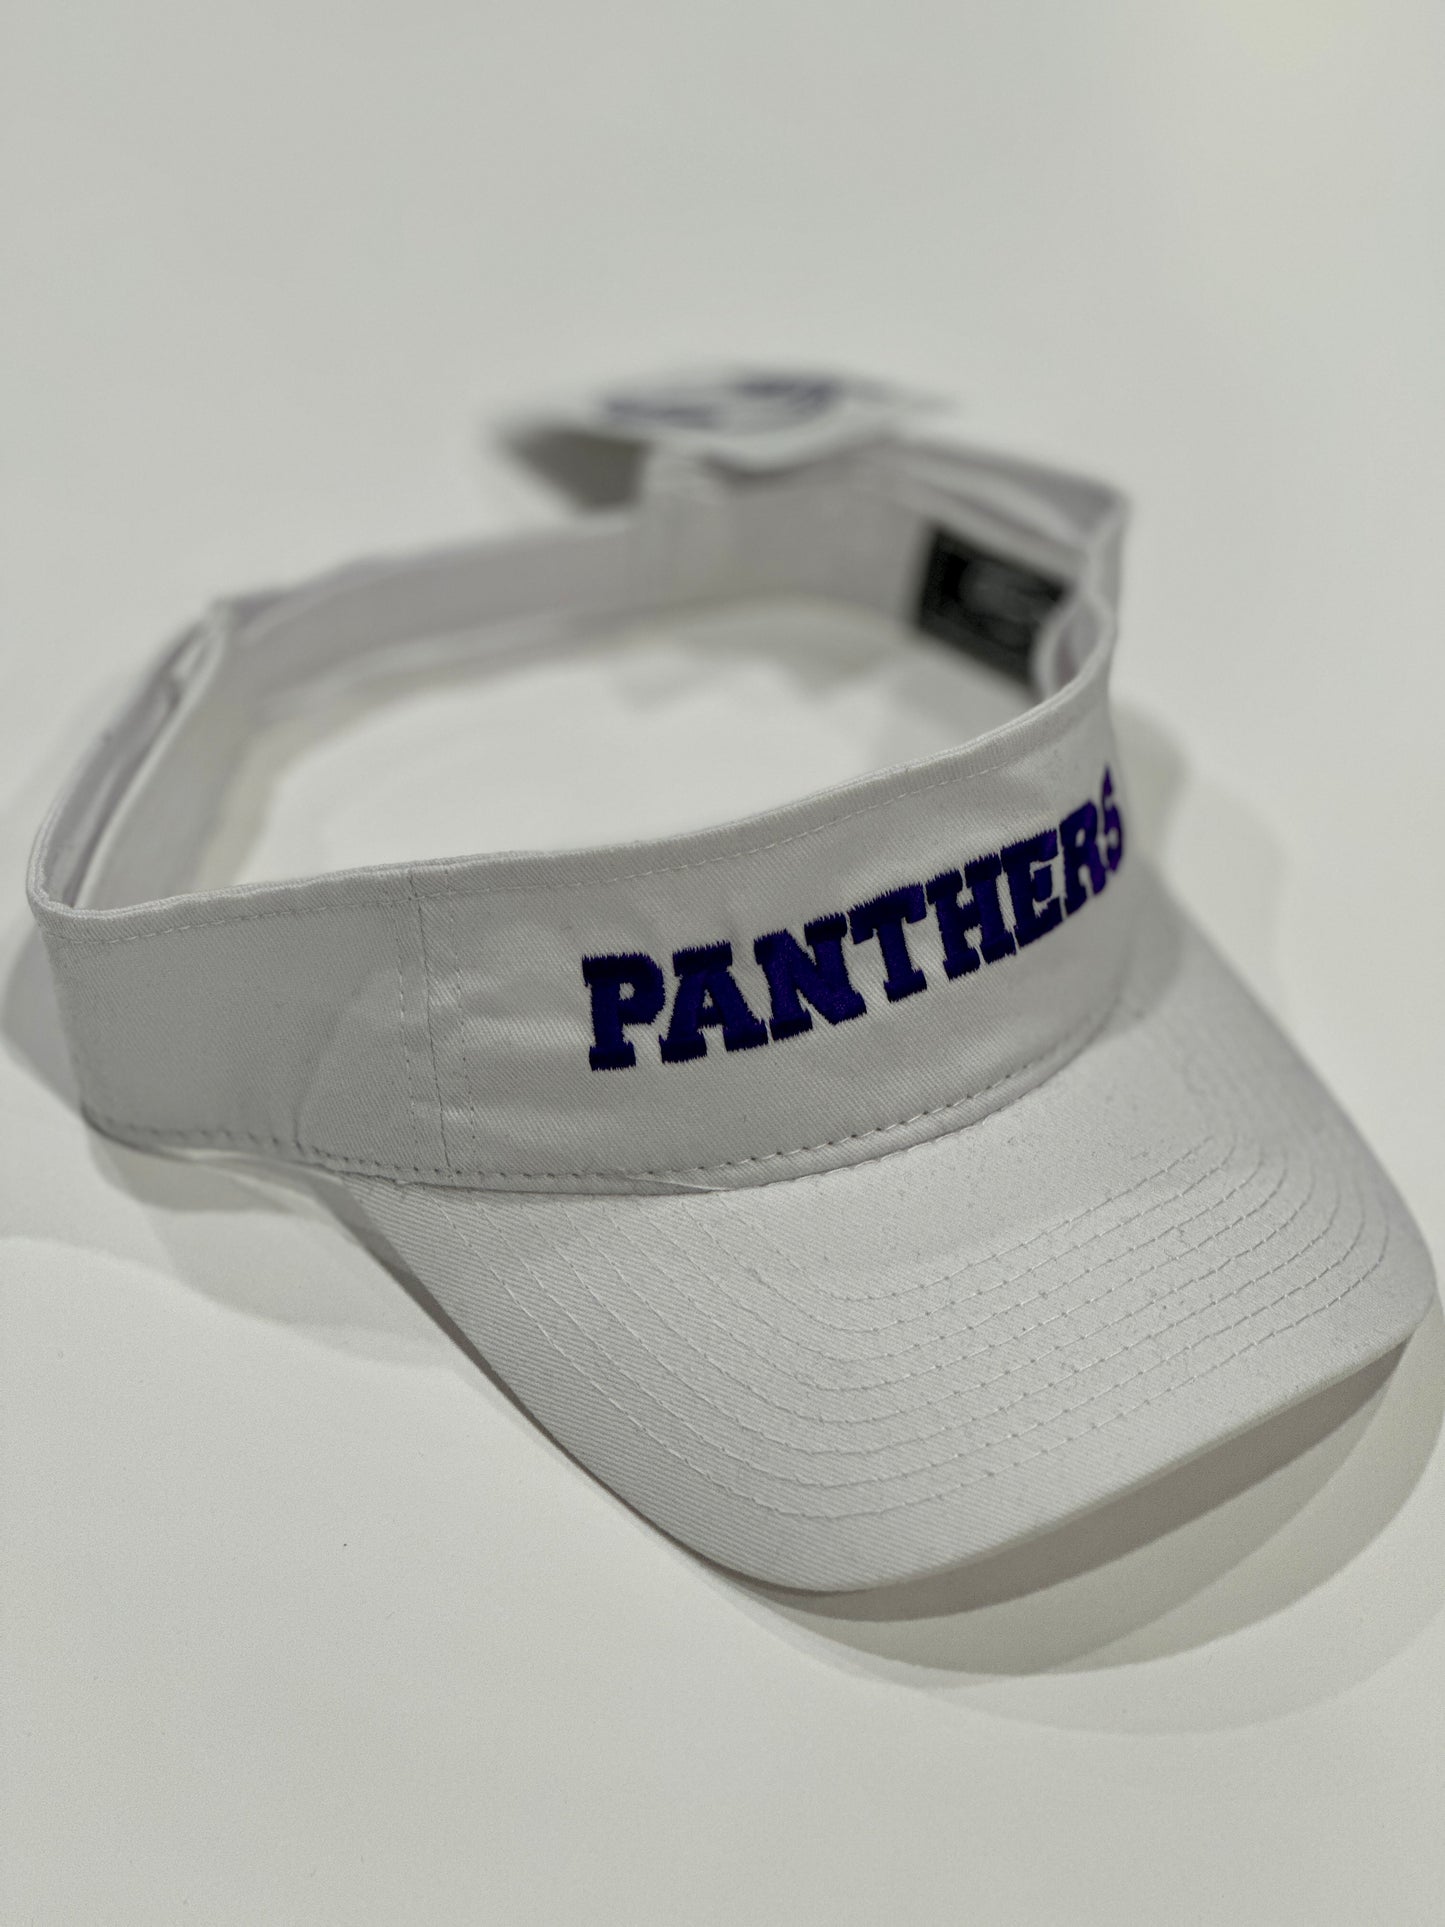 Panthers Visor White W/ Purple Embroidery